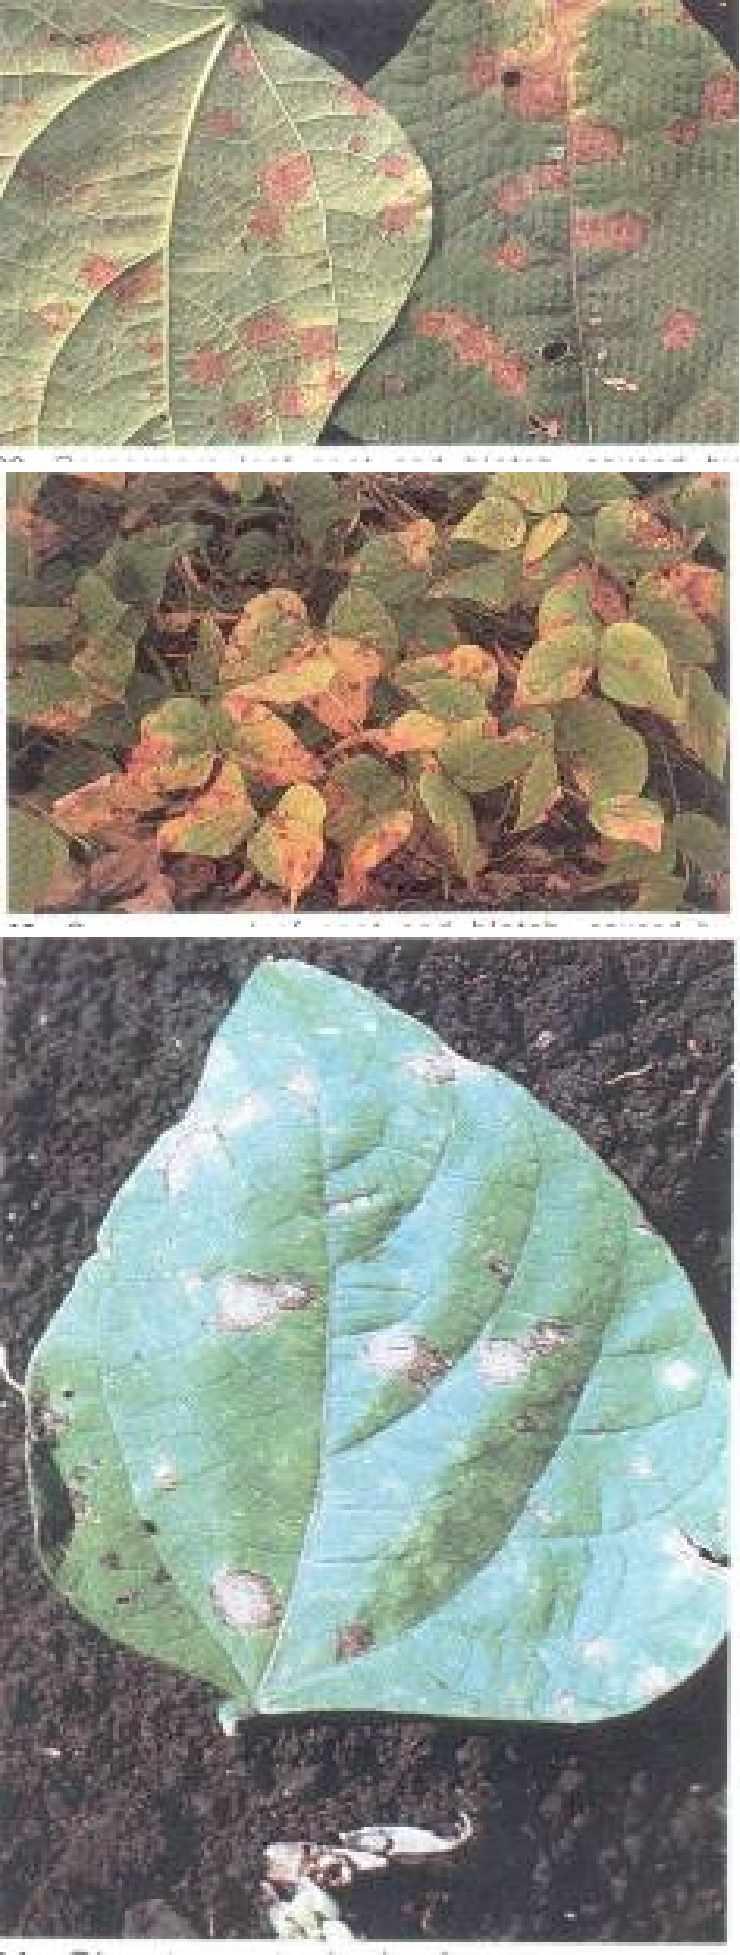 51 Cercospora leaf spot and blotch, caused by Cercospora canescens 52 Cercospora leaf spot and